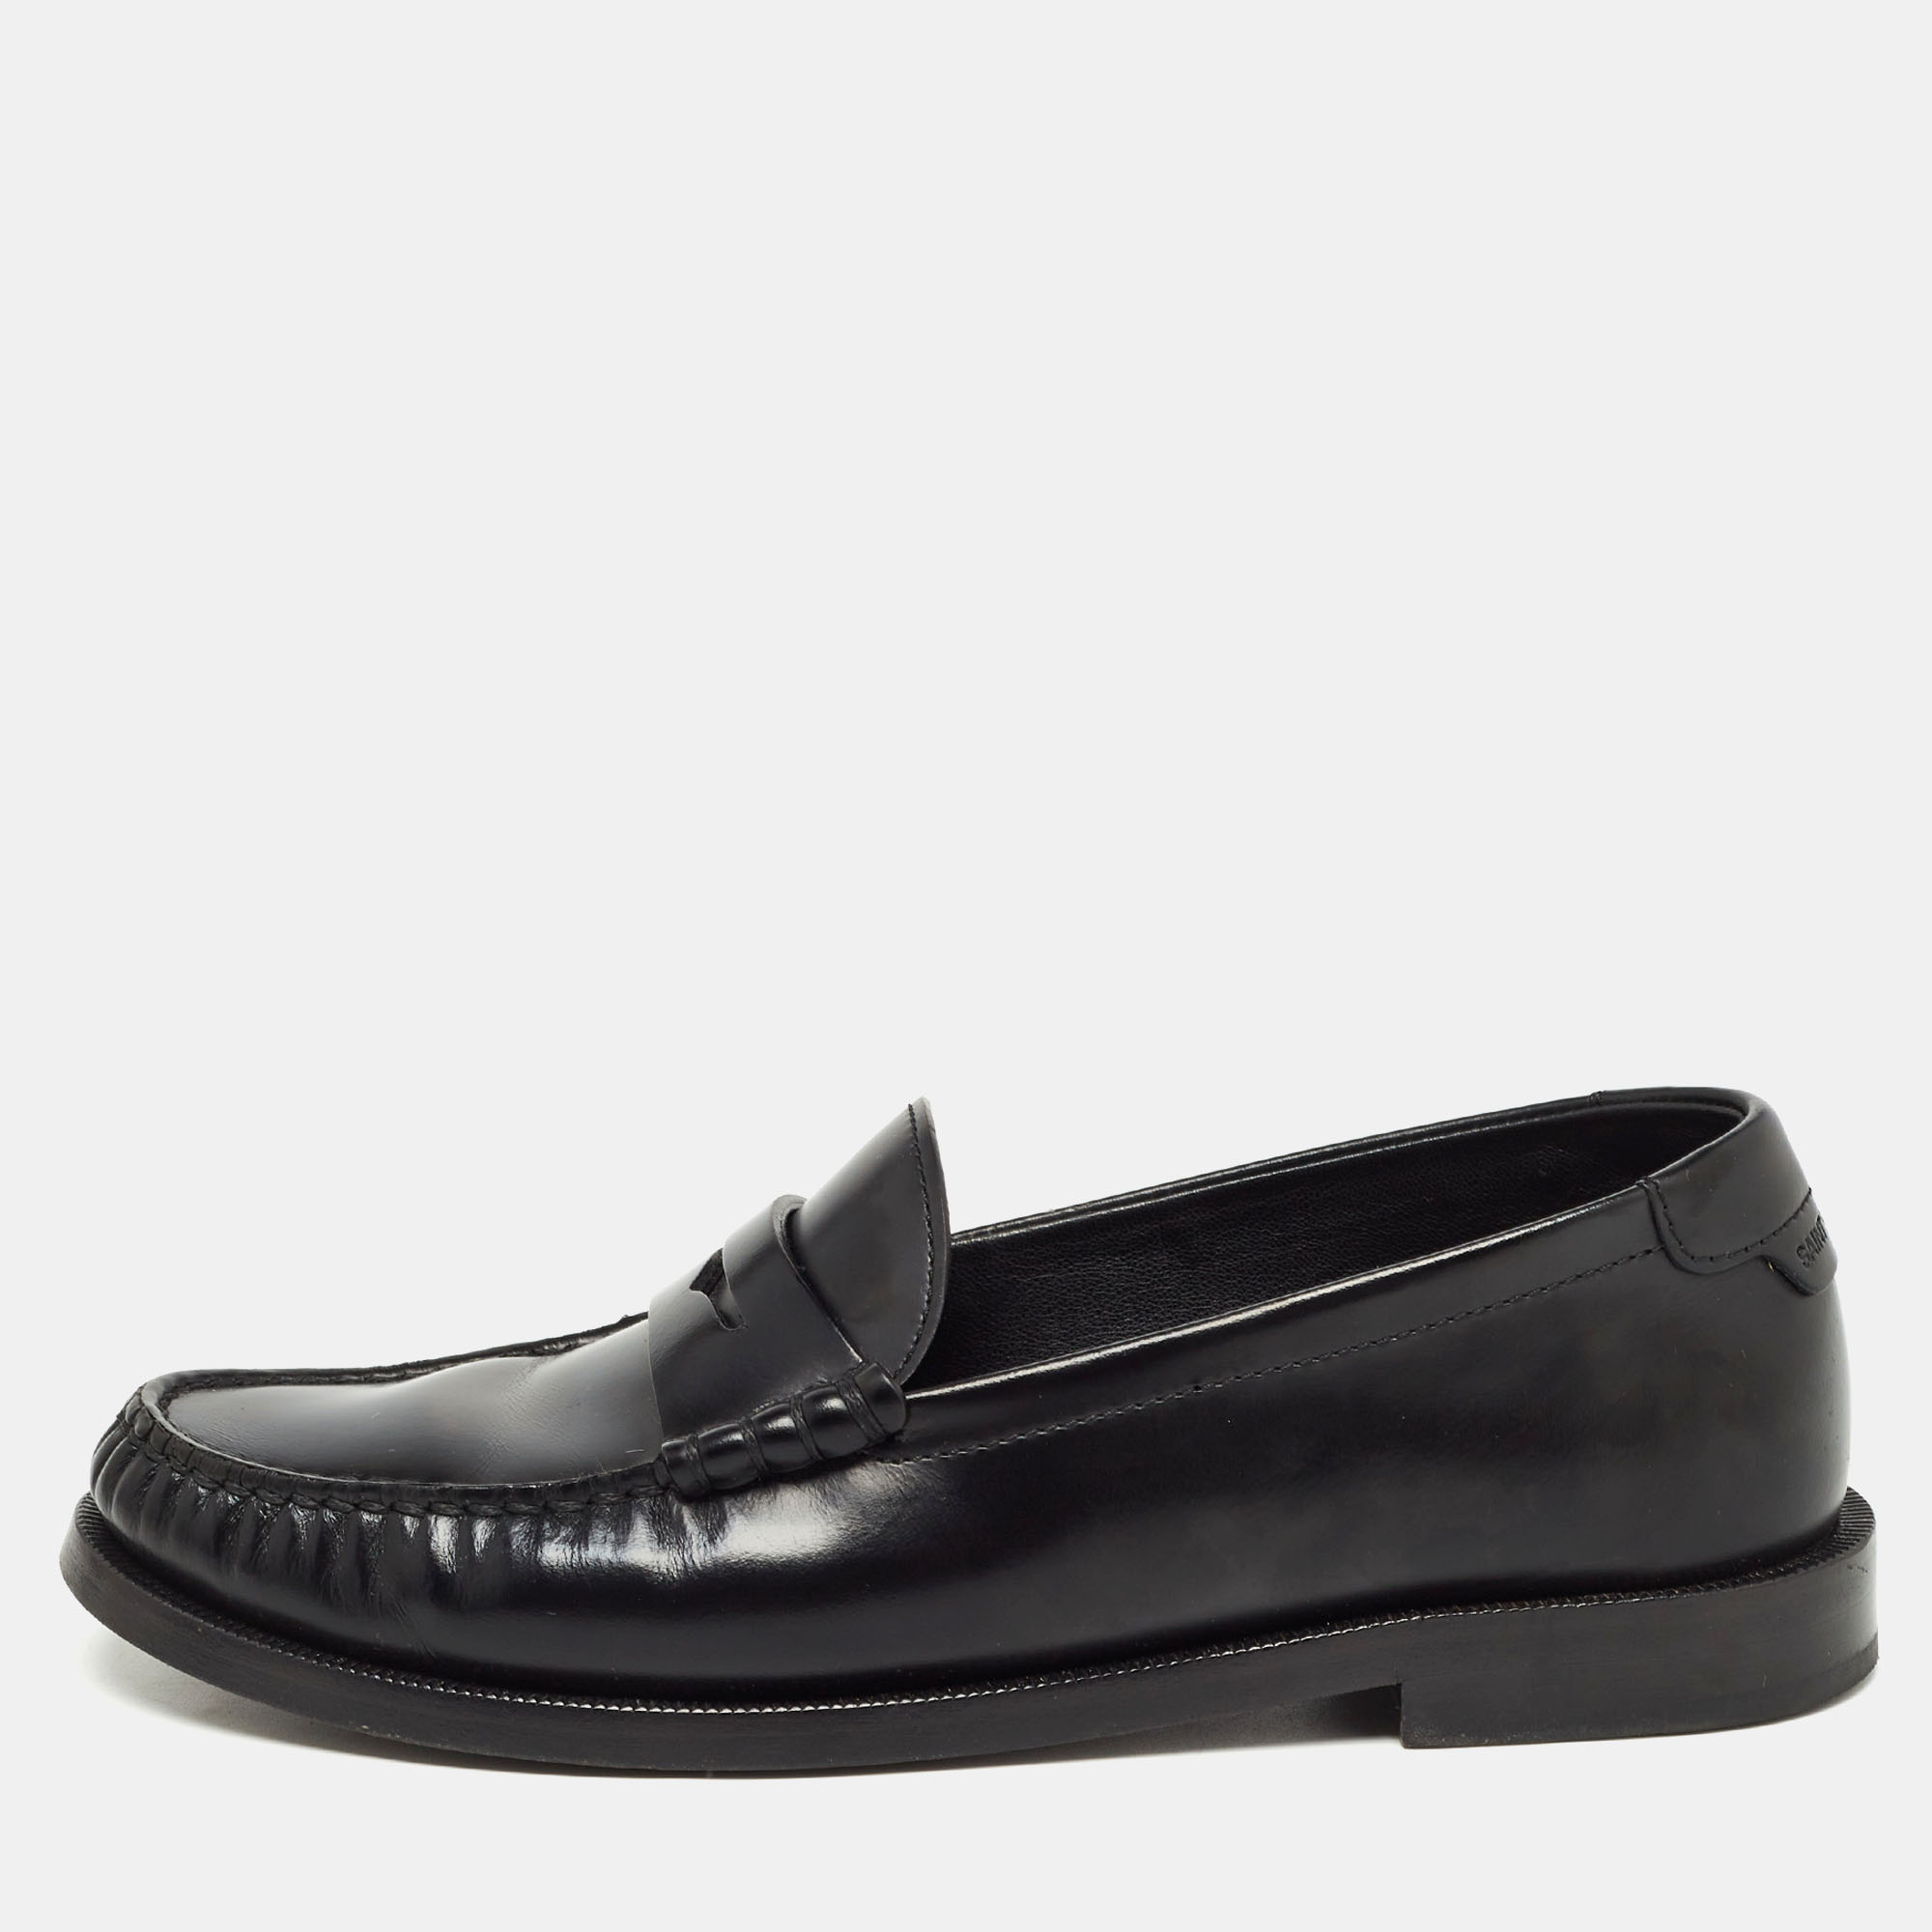 Pre-owned Saint Laurent Black Leather Slip On Loafers Size 35.5